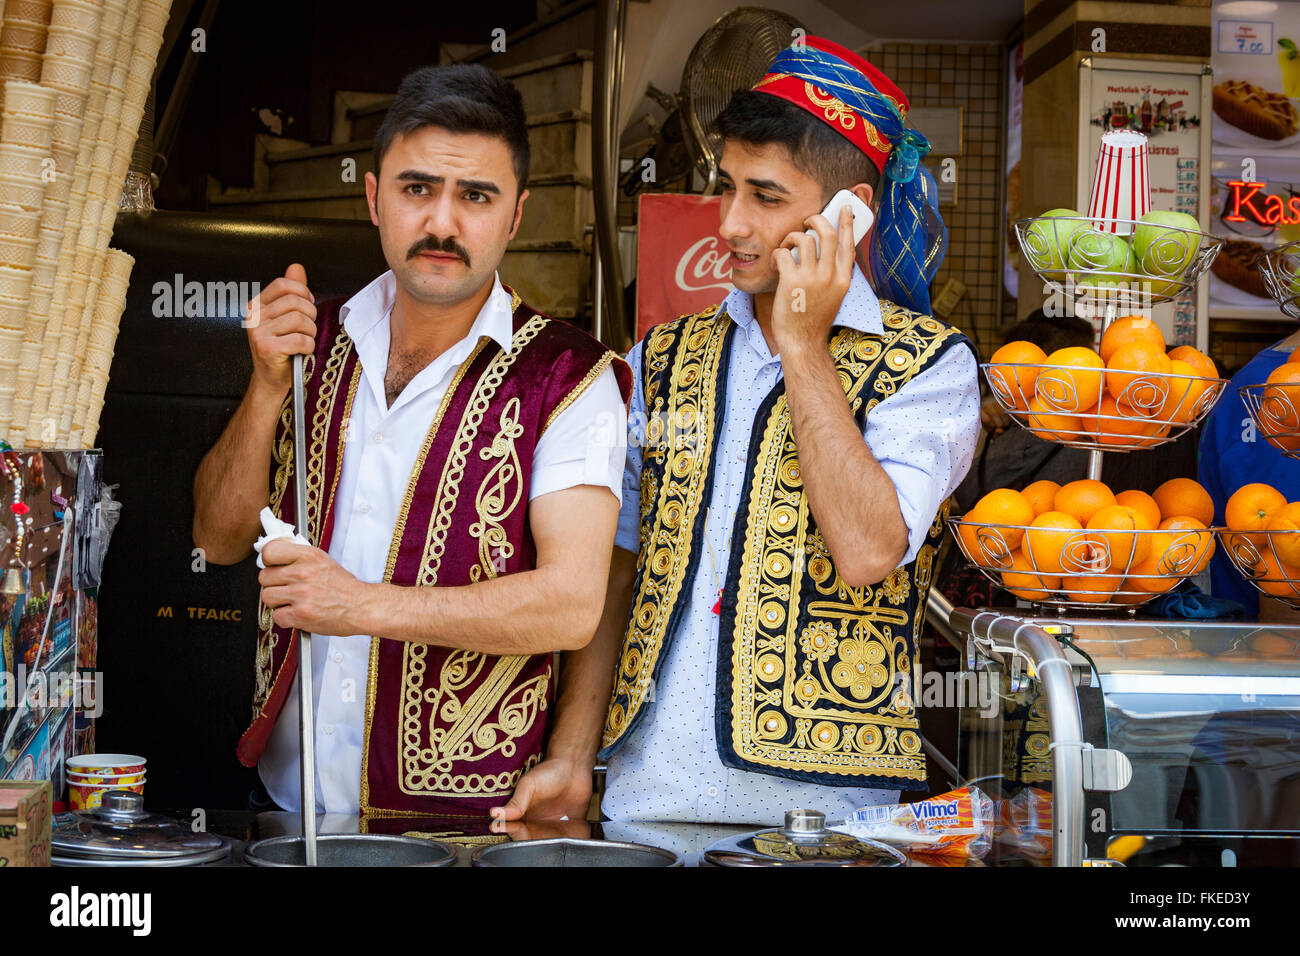 Two shop assistants wearing traditional costume, Istanbul, Turkey Stock Photo